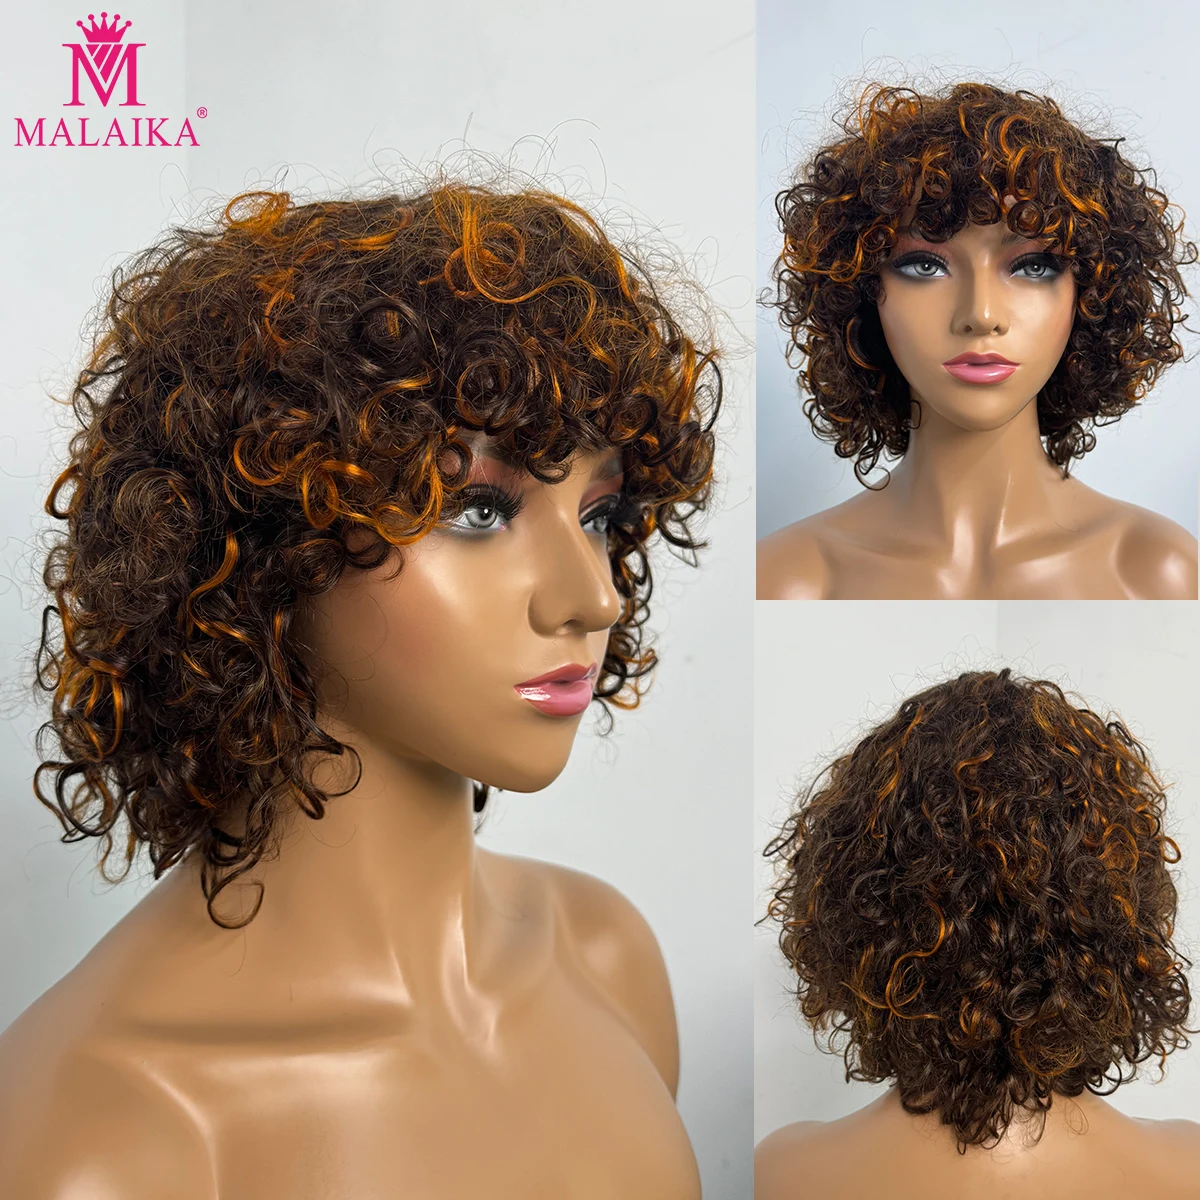 

Ginger 200 Density Full Machine Made Water Wave Human Hair Wig with Bangs Short Jerry Curly Human Hair Bob Wigs 12inch for Women